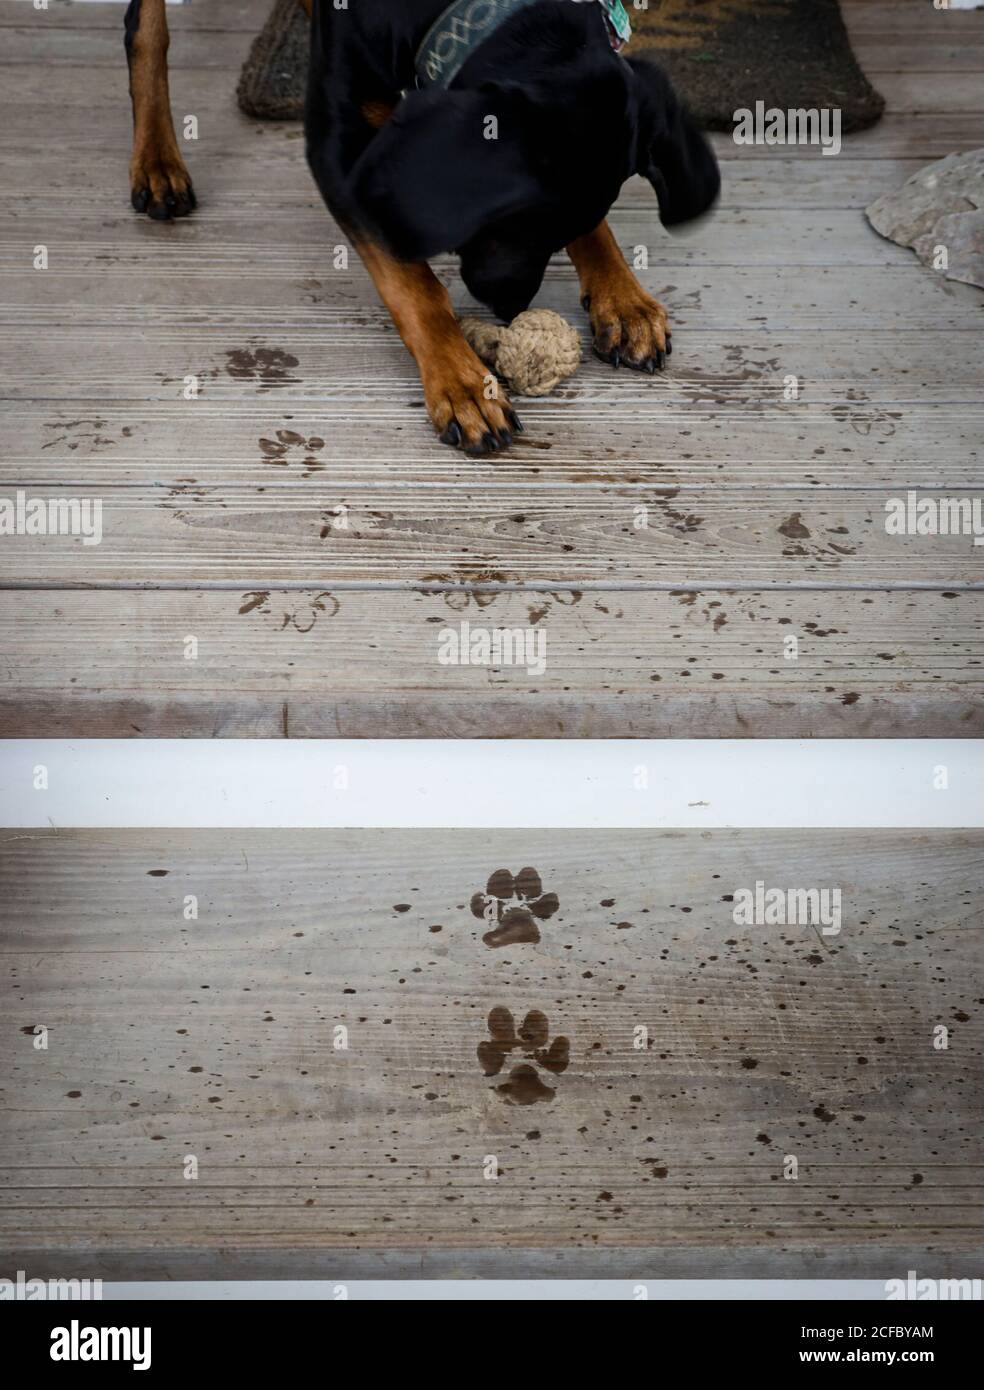 Dog paws on ash wood stairs Stock Photo